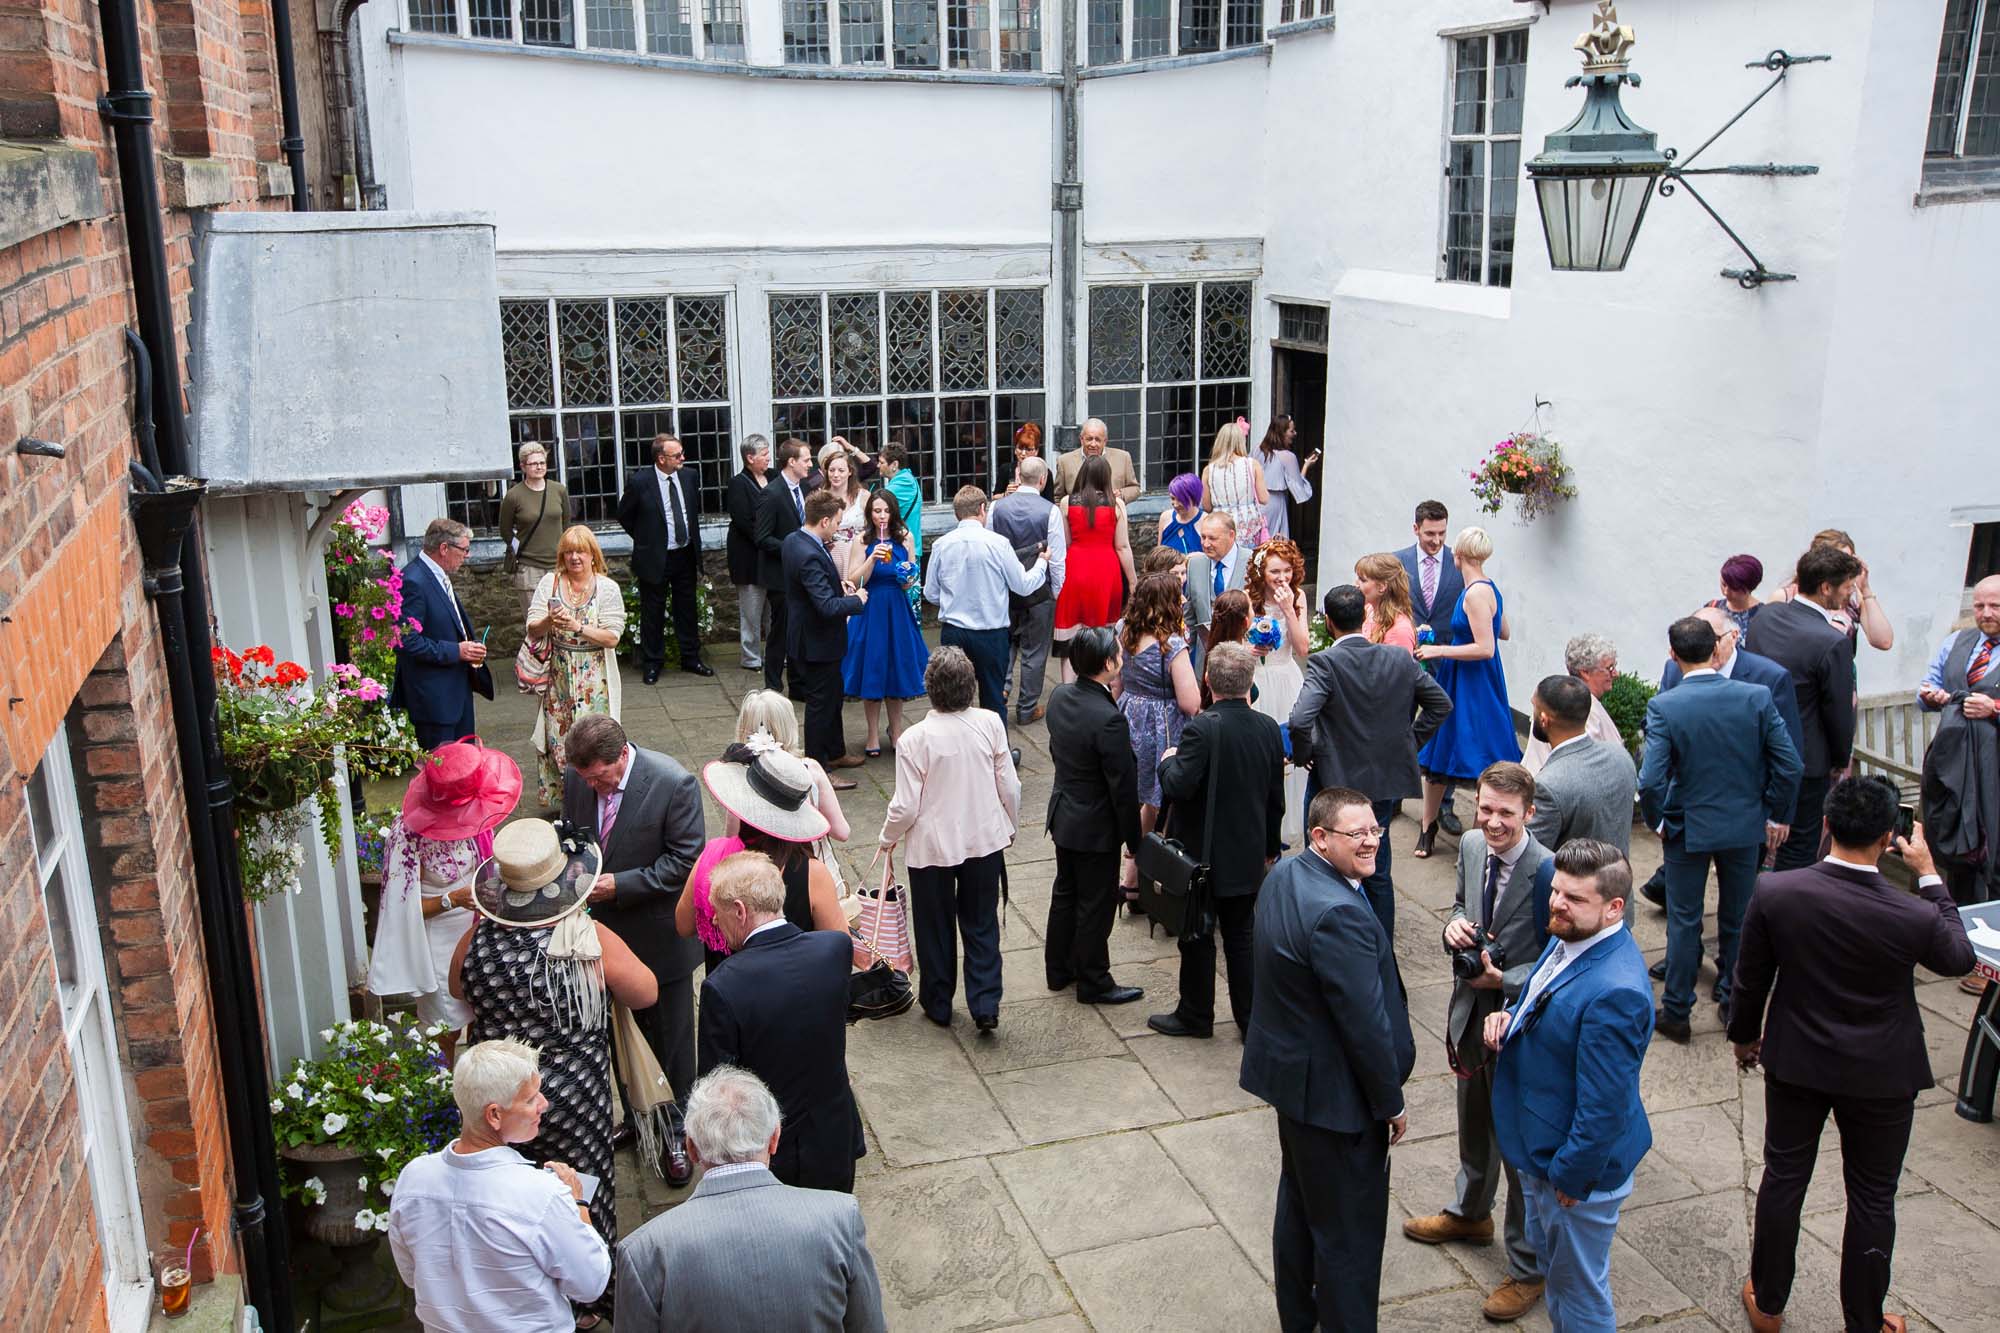 The enclosed courtyard offers a beautiful setting for group photos.